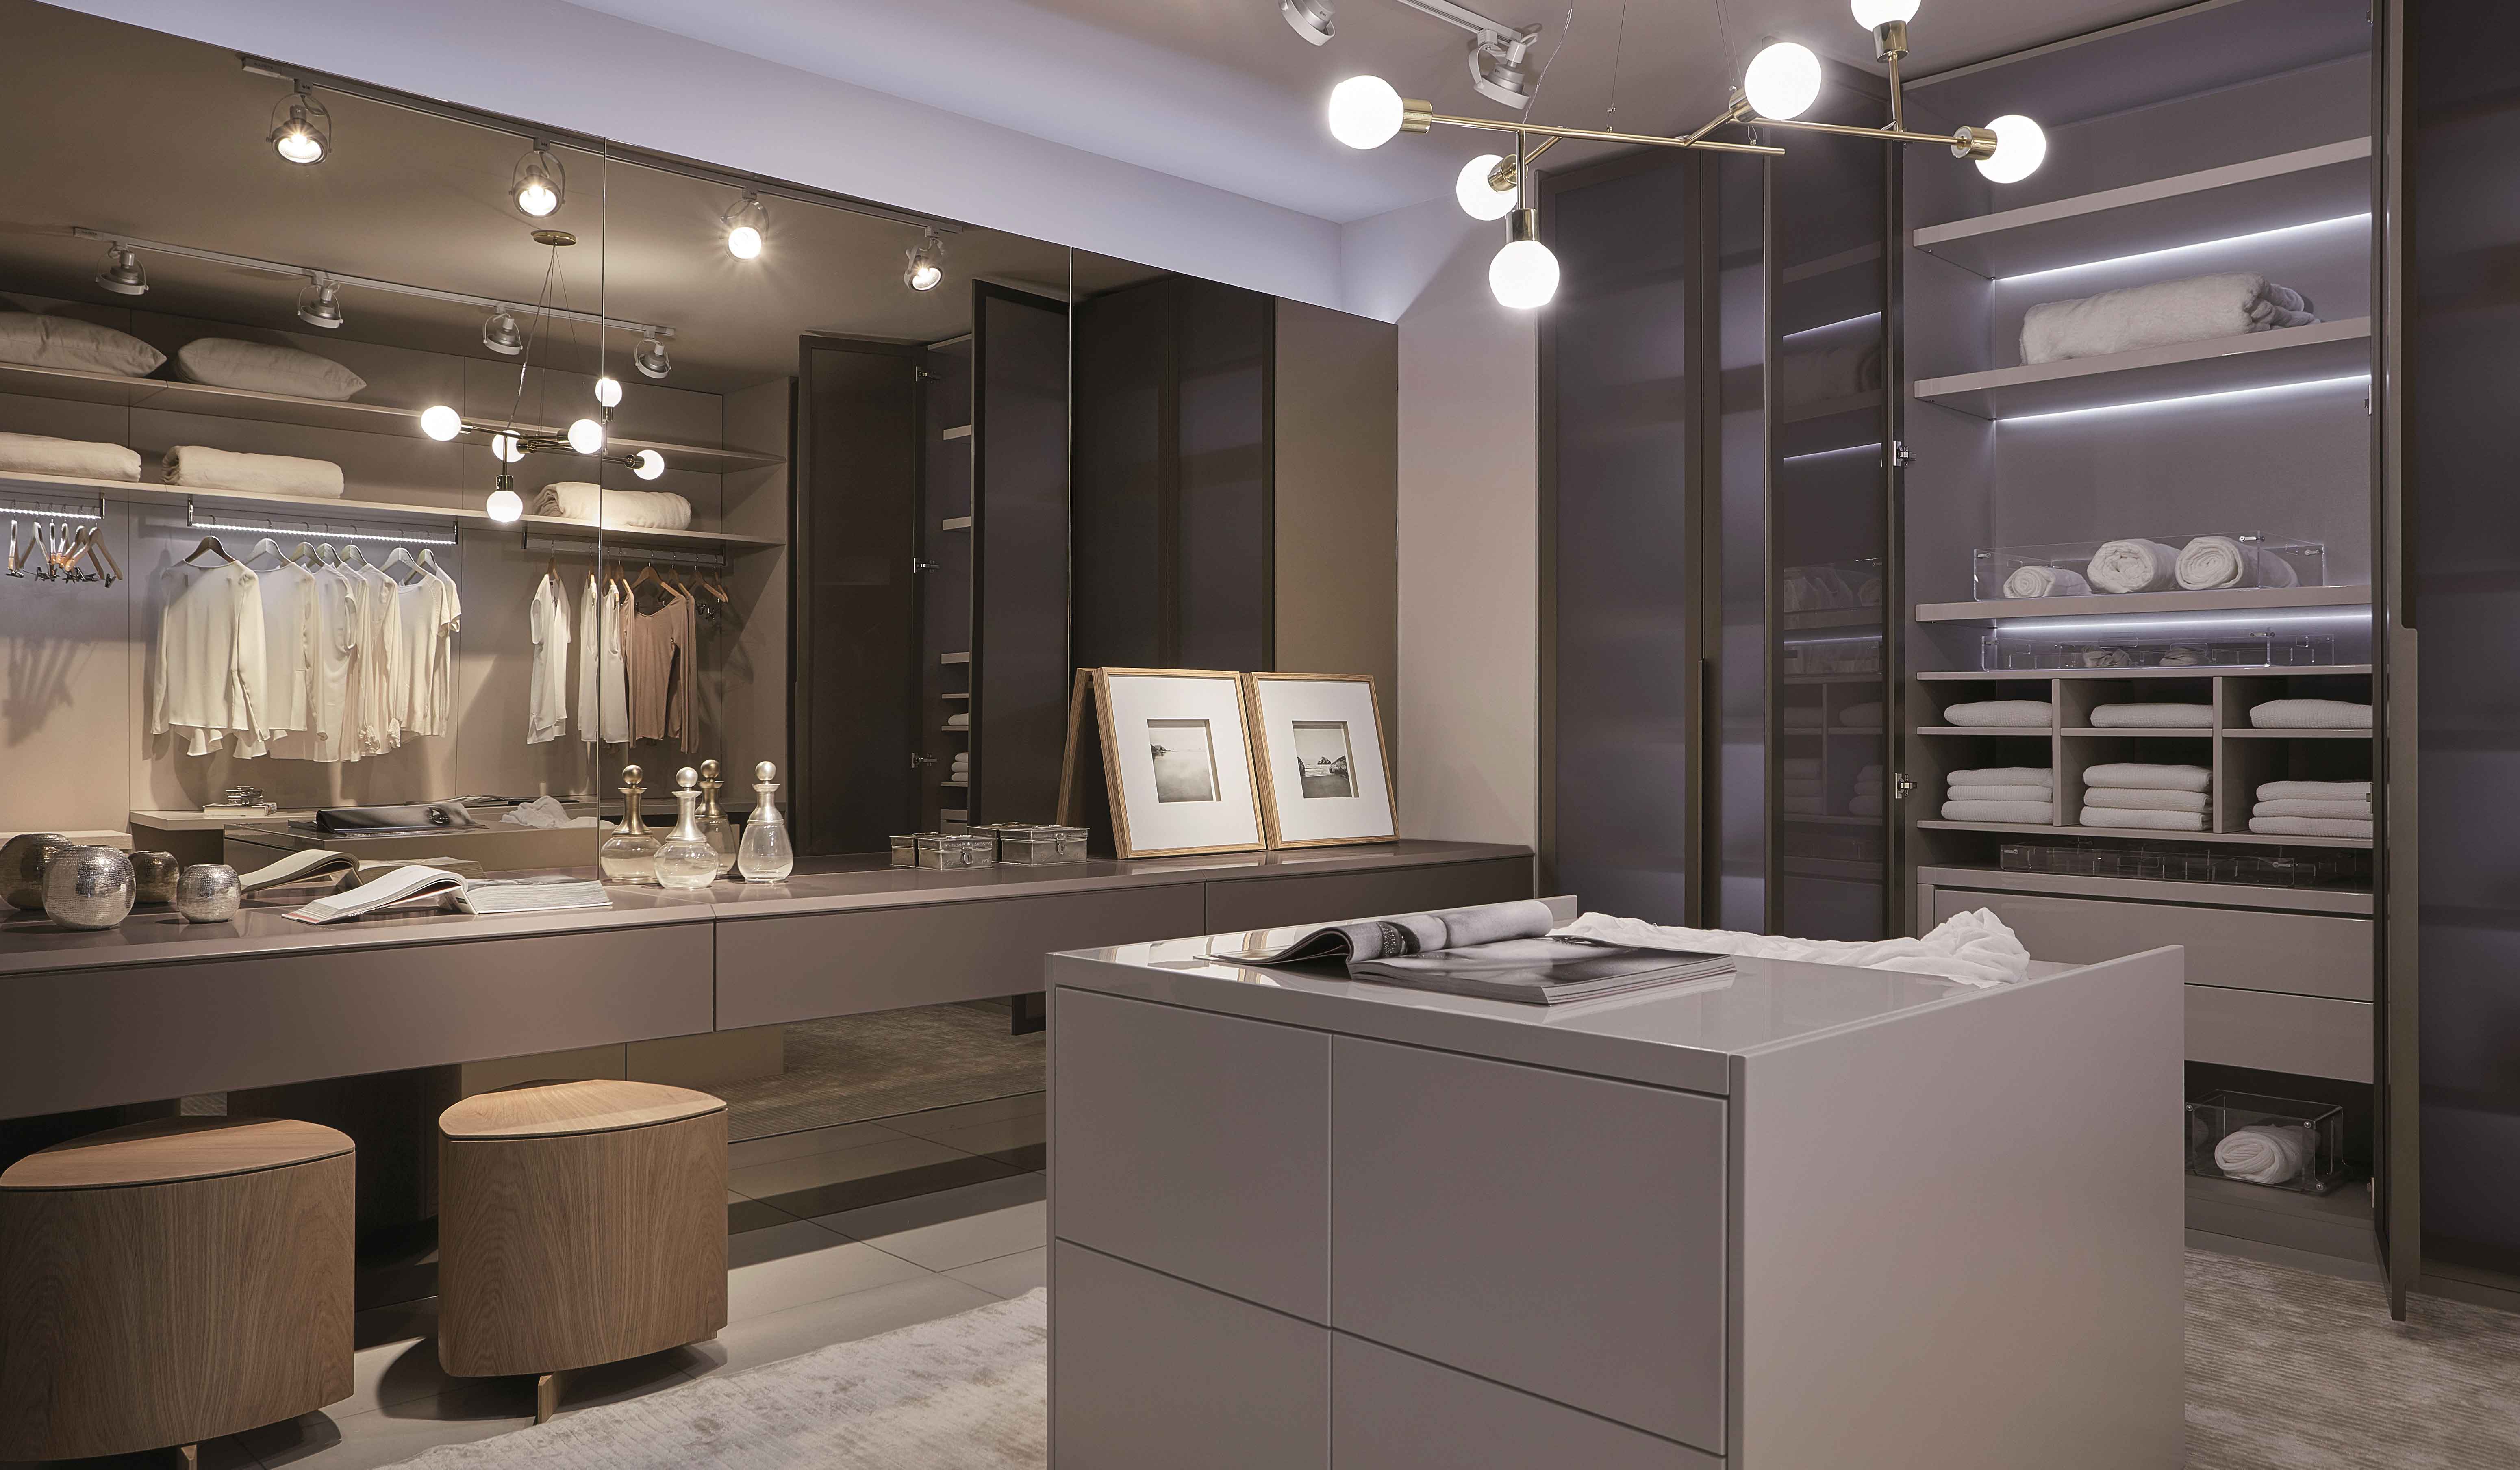 Dell Anno Is All About Contemporary Luxury Cabinetry, Timeless Design And Fine Craftsmanship.